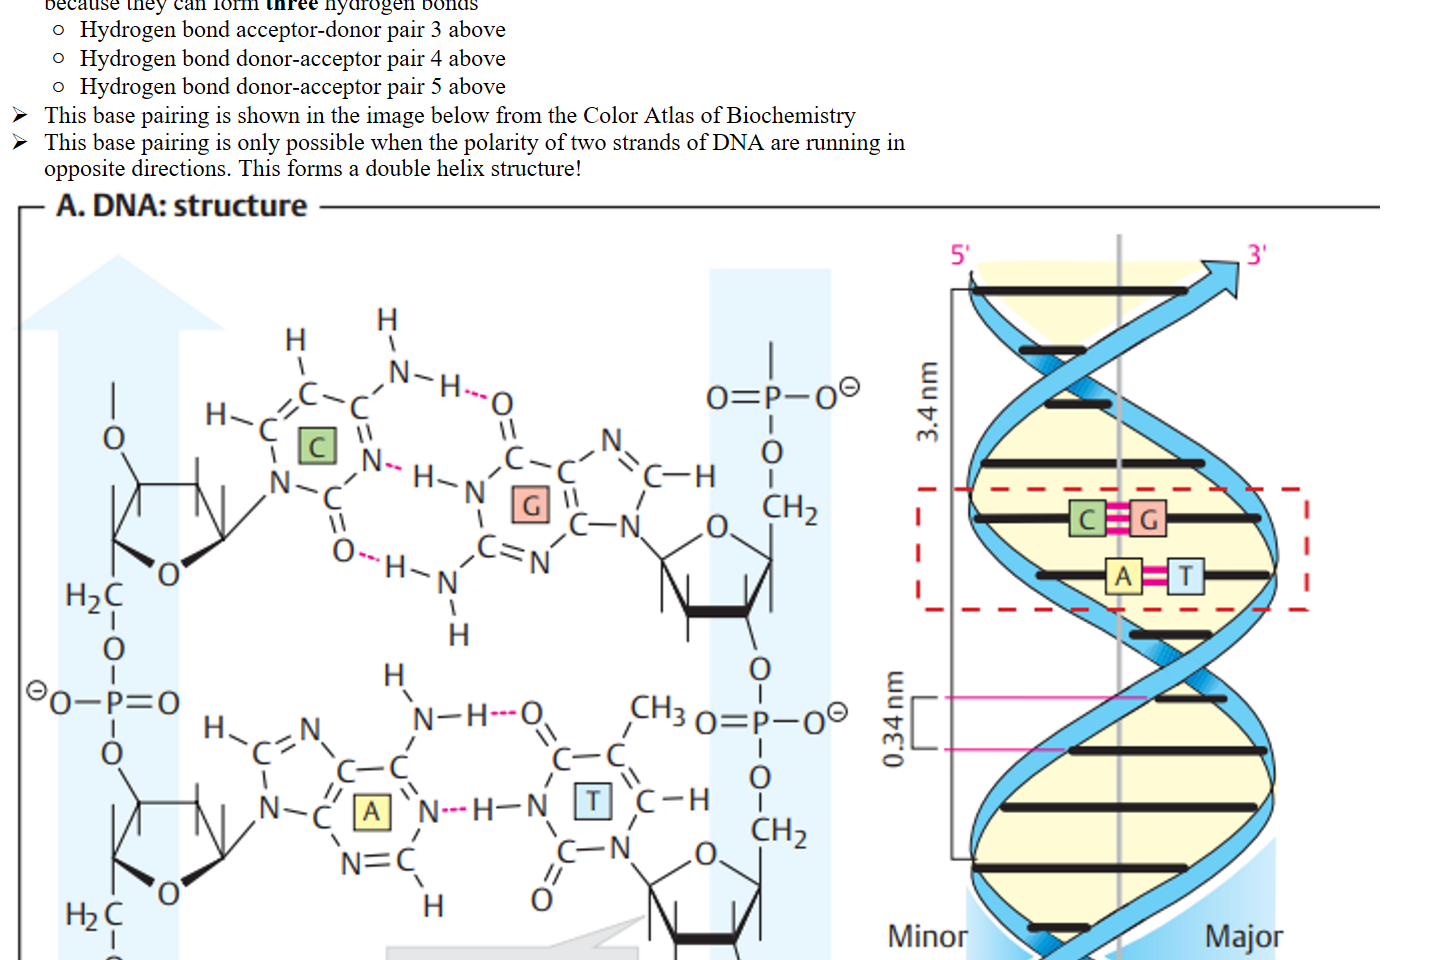 The left side of Guanine in the above image will base pair with the left side of Cytosine because they can form three hydrogen bonds
Hydrogen bond acceptor-donor pair 3 above
Hydrogen bond donor-acceptor pair 4 above
Hydrogen bond donor-acceptor pair 5 above
This base pairing is shown in the image below from the Color Atlas of Biochemistry
This base pairing is only possible when the polarity of two strands of DNA are running in opposite directions. This forms a double helix structure!
Untitled picture.png Machine generated alternative text:
— A. DNA: structure 
1. Formula 
CH3 0 
o 
CH20H 
CH2 
CH2 
Minor 
groove 
2. Double strand 
Major 
groove 
OH 
2'-deoxy- 
D-ribose 
